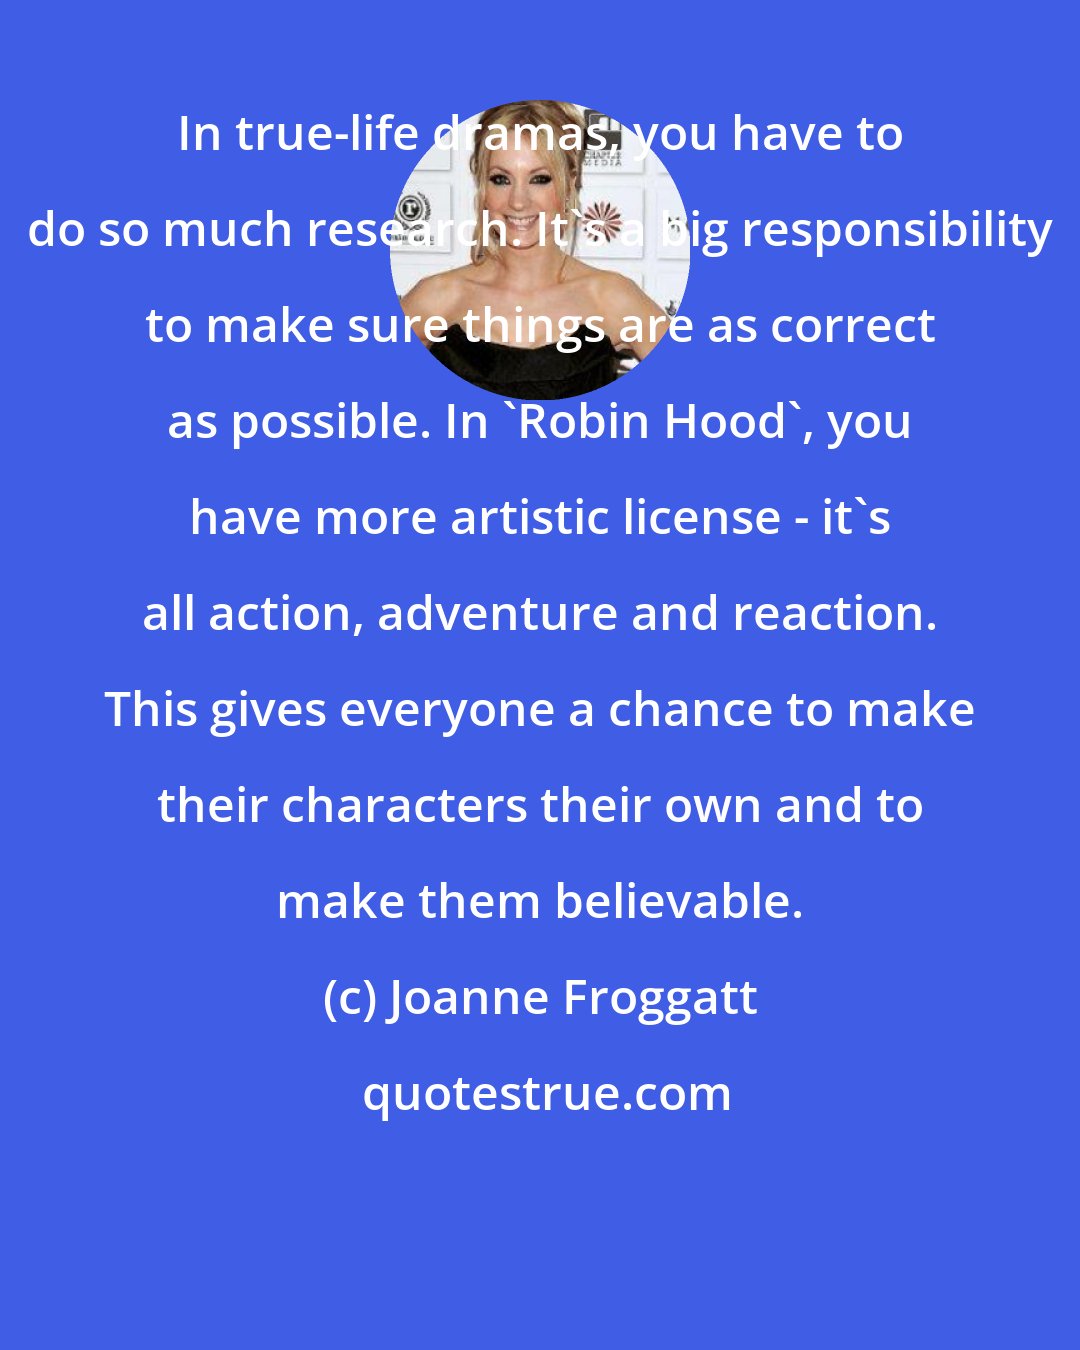 Joanne Froggatt: In true-life dramas, you have to do so much research. It's a big responsibility to make sure things are as correct as possible. In 'Robin Hood', you have more artistic license - it's all action, adventure and reaction. This gives everyone a chance to make their characters their own and to make them believable.